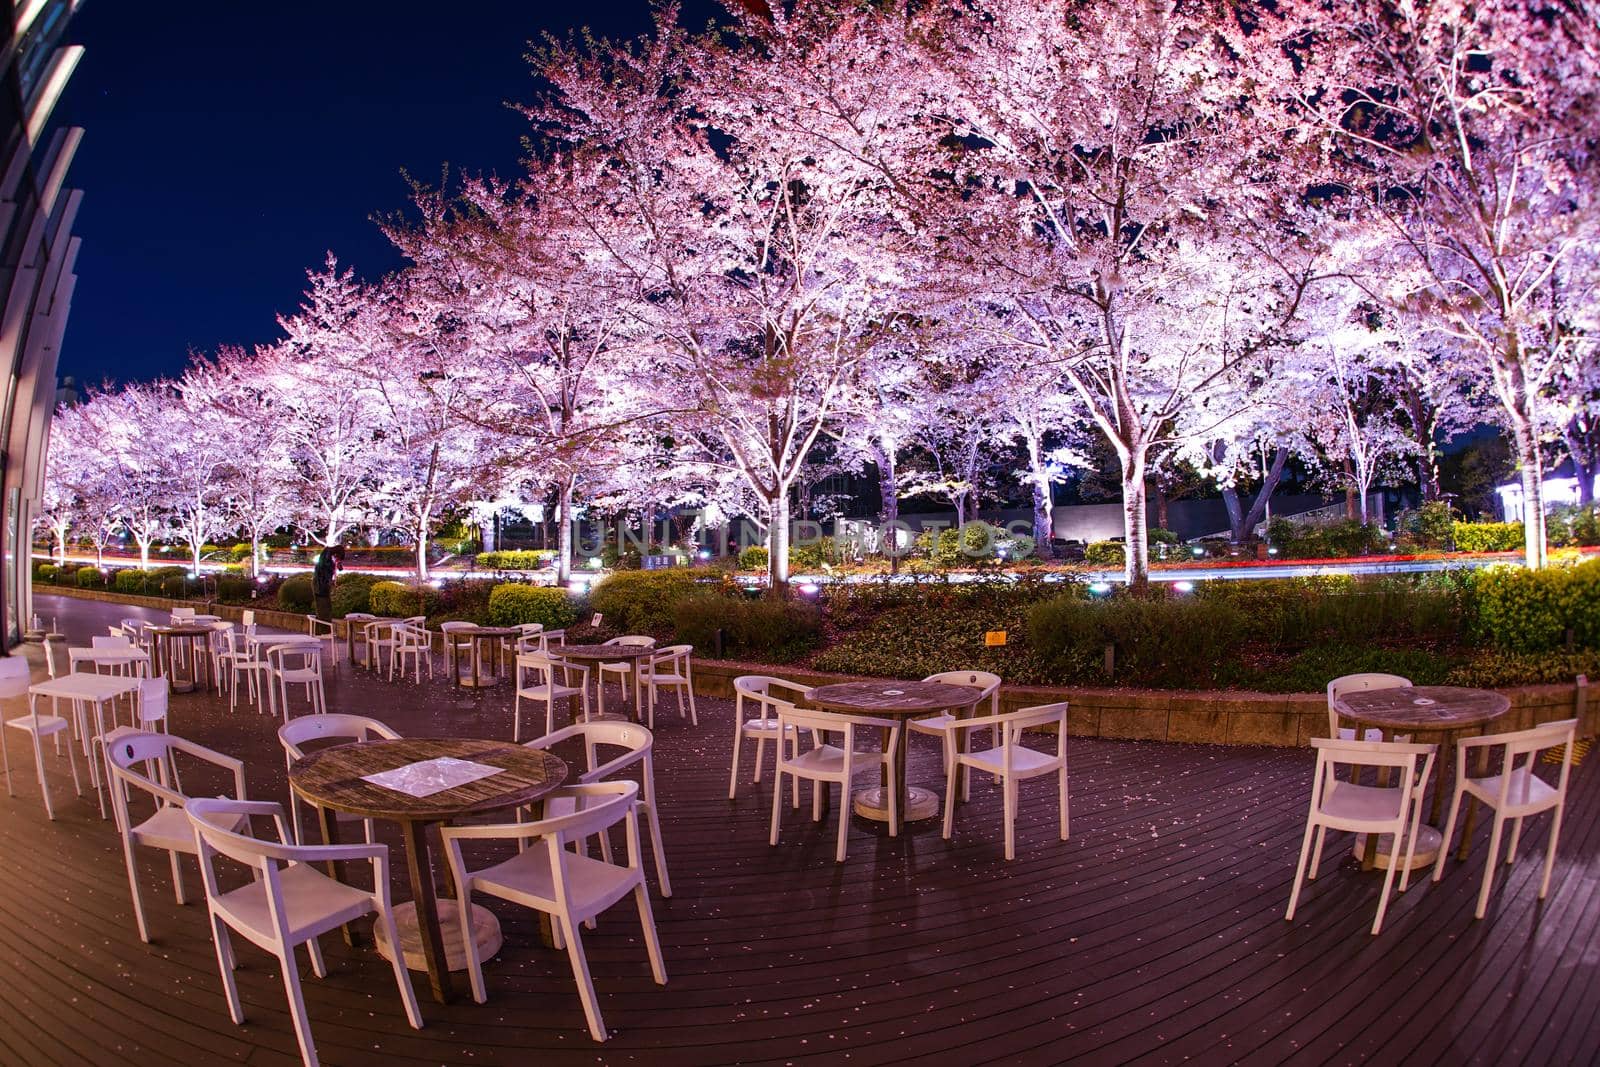 Cherry blossoms and benches in full bloom. Shooting Location: Tokyo metropolitan area